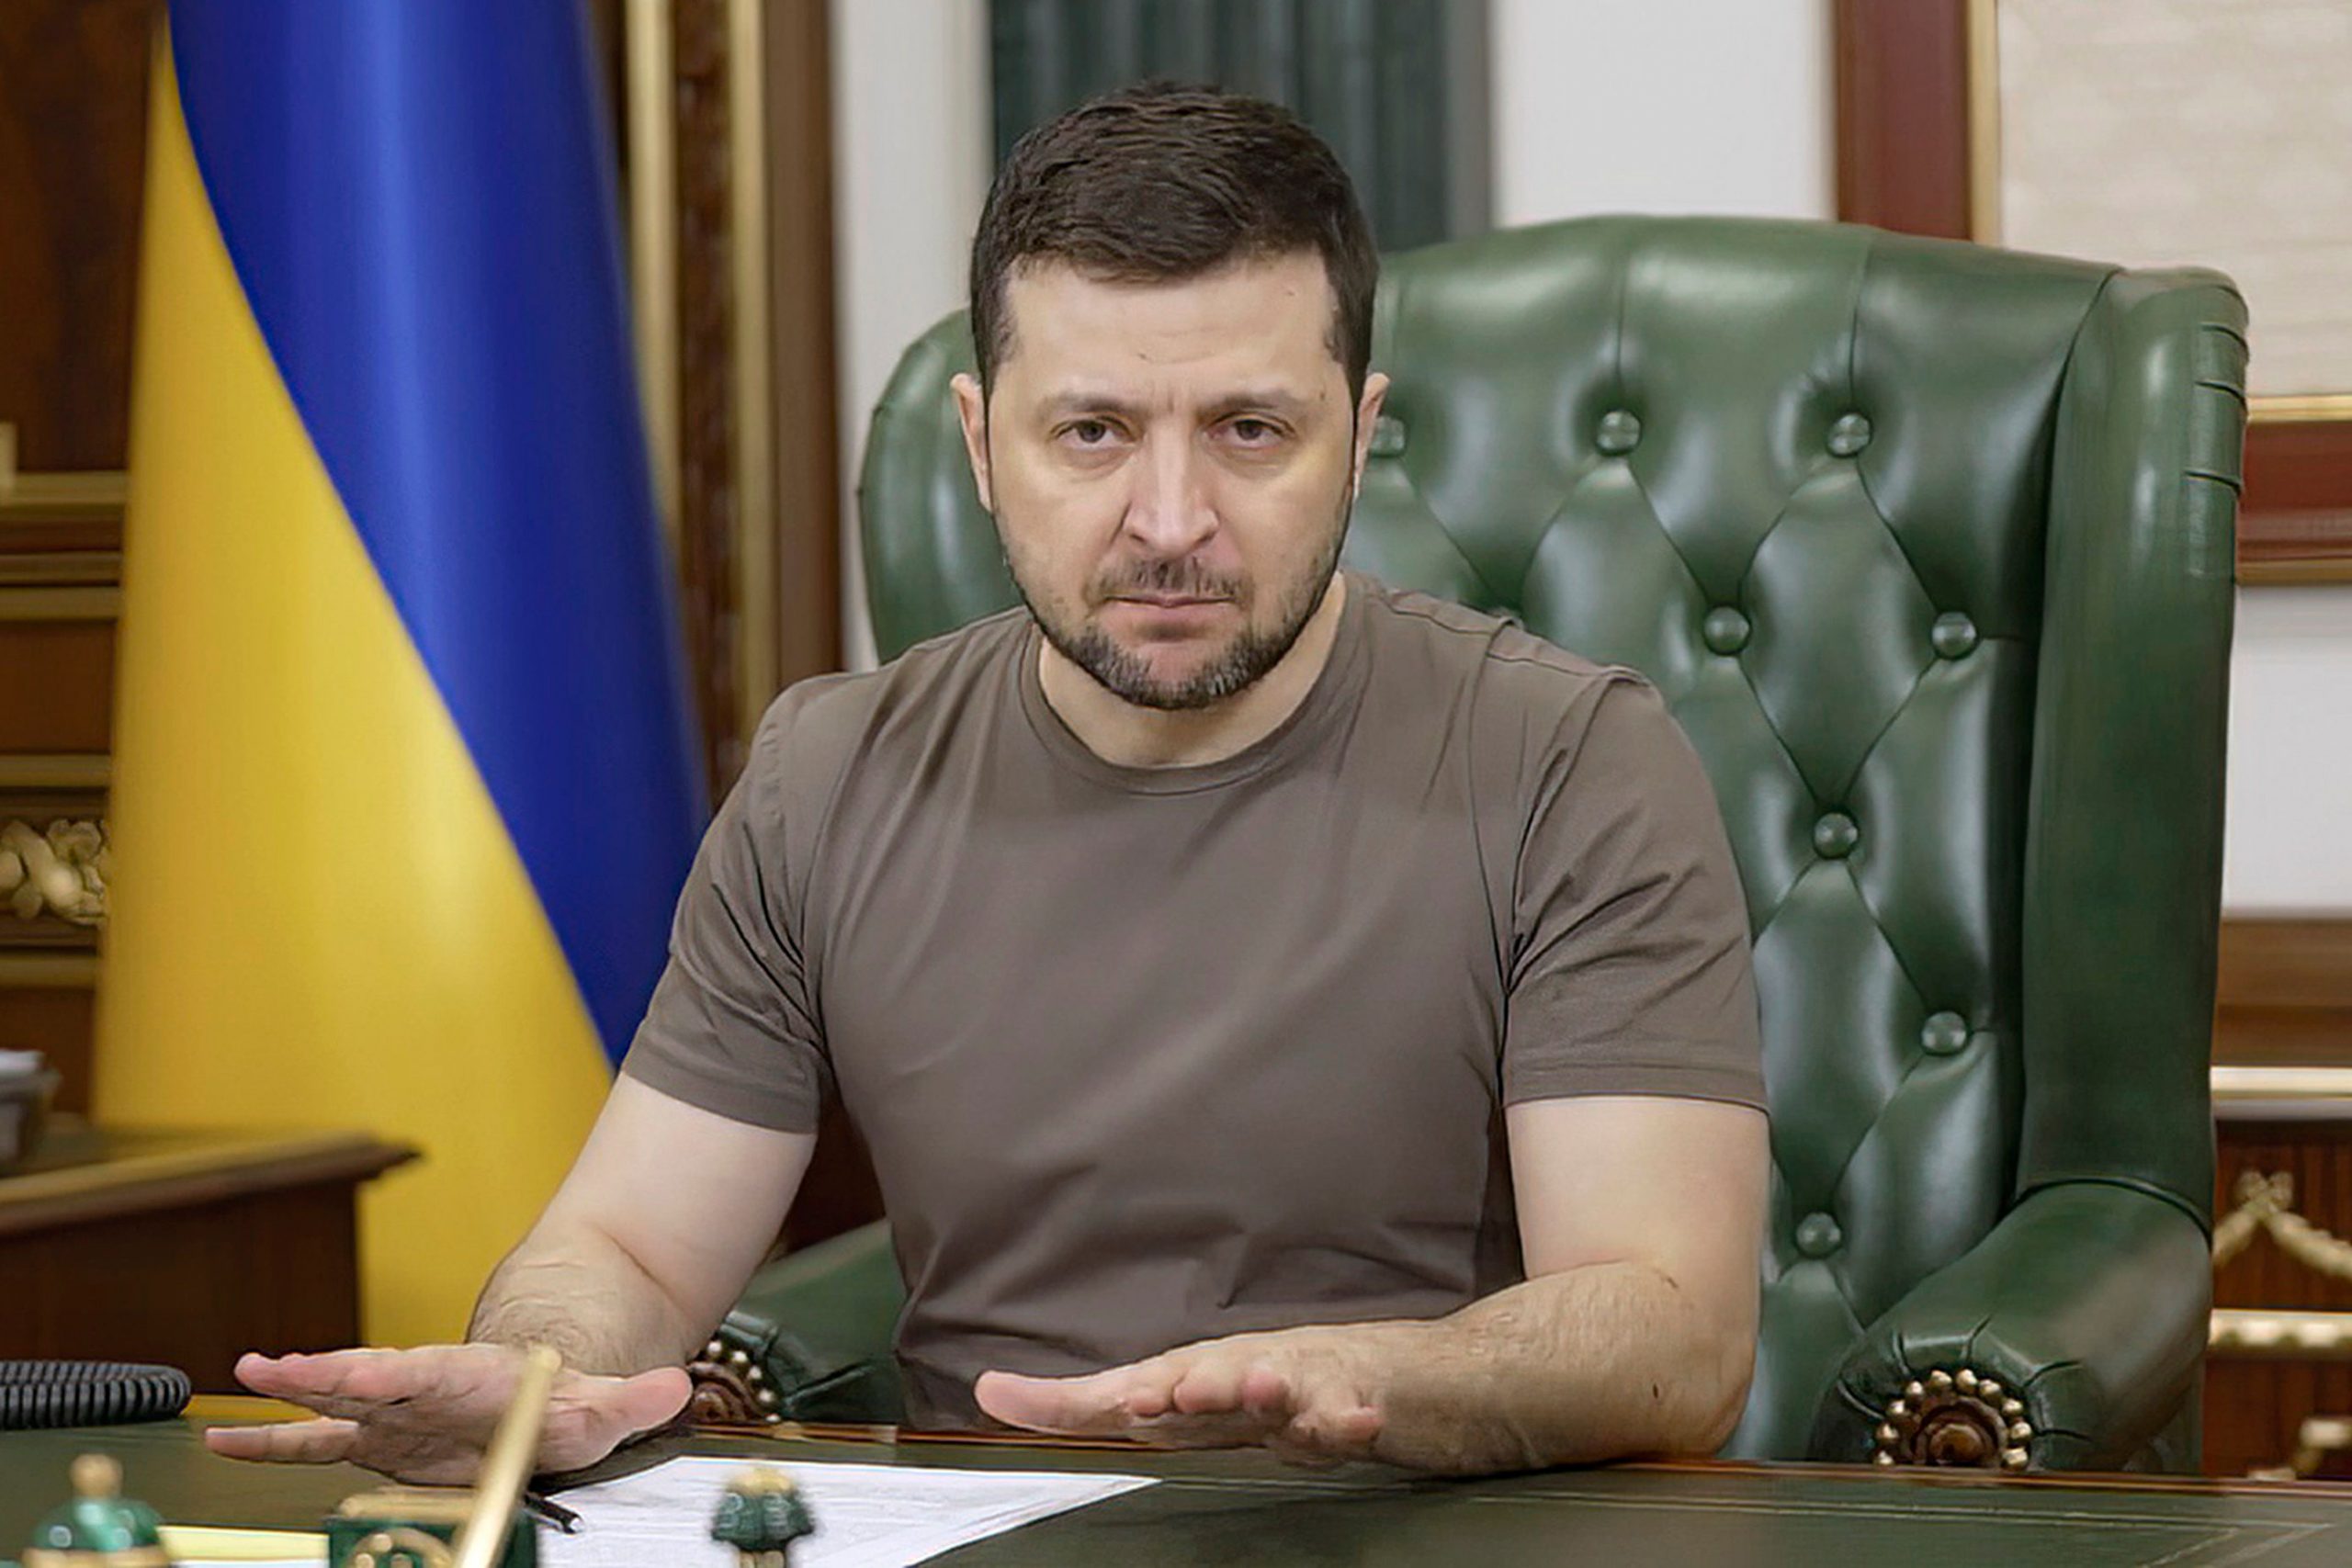 Why Volodymyr Zelensky fired Kharkiv’s top security services officer